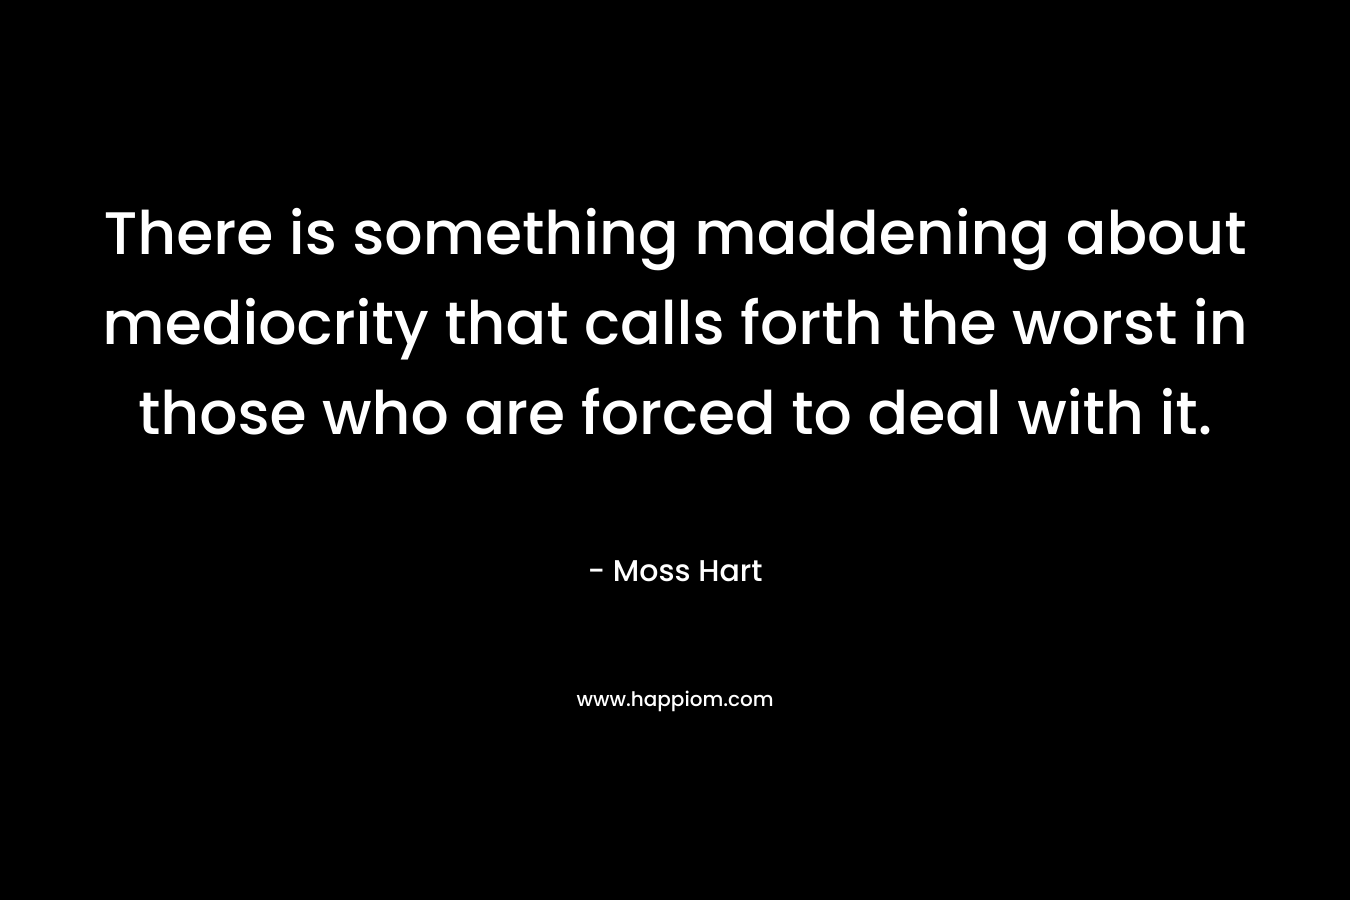 There is something maddening about mediocrity that calls forth the worst in those who are forced to deal with it.